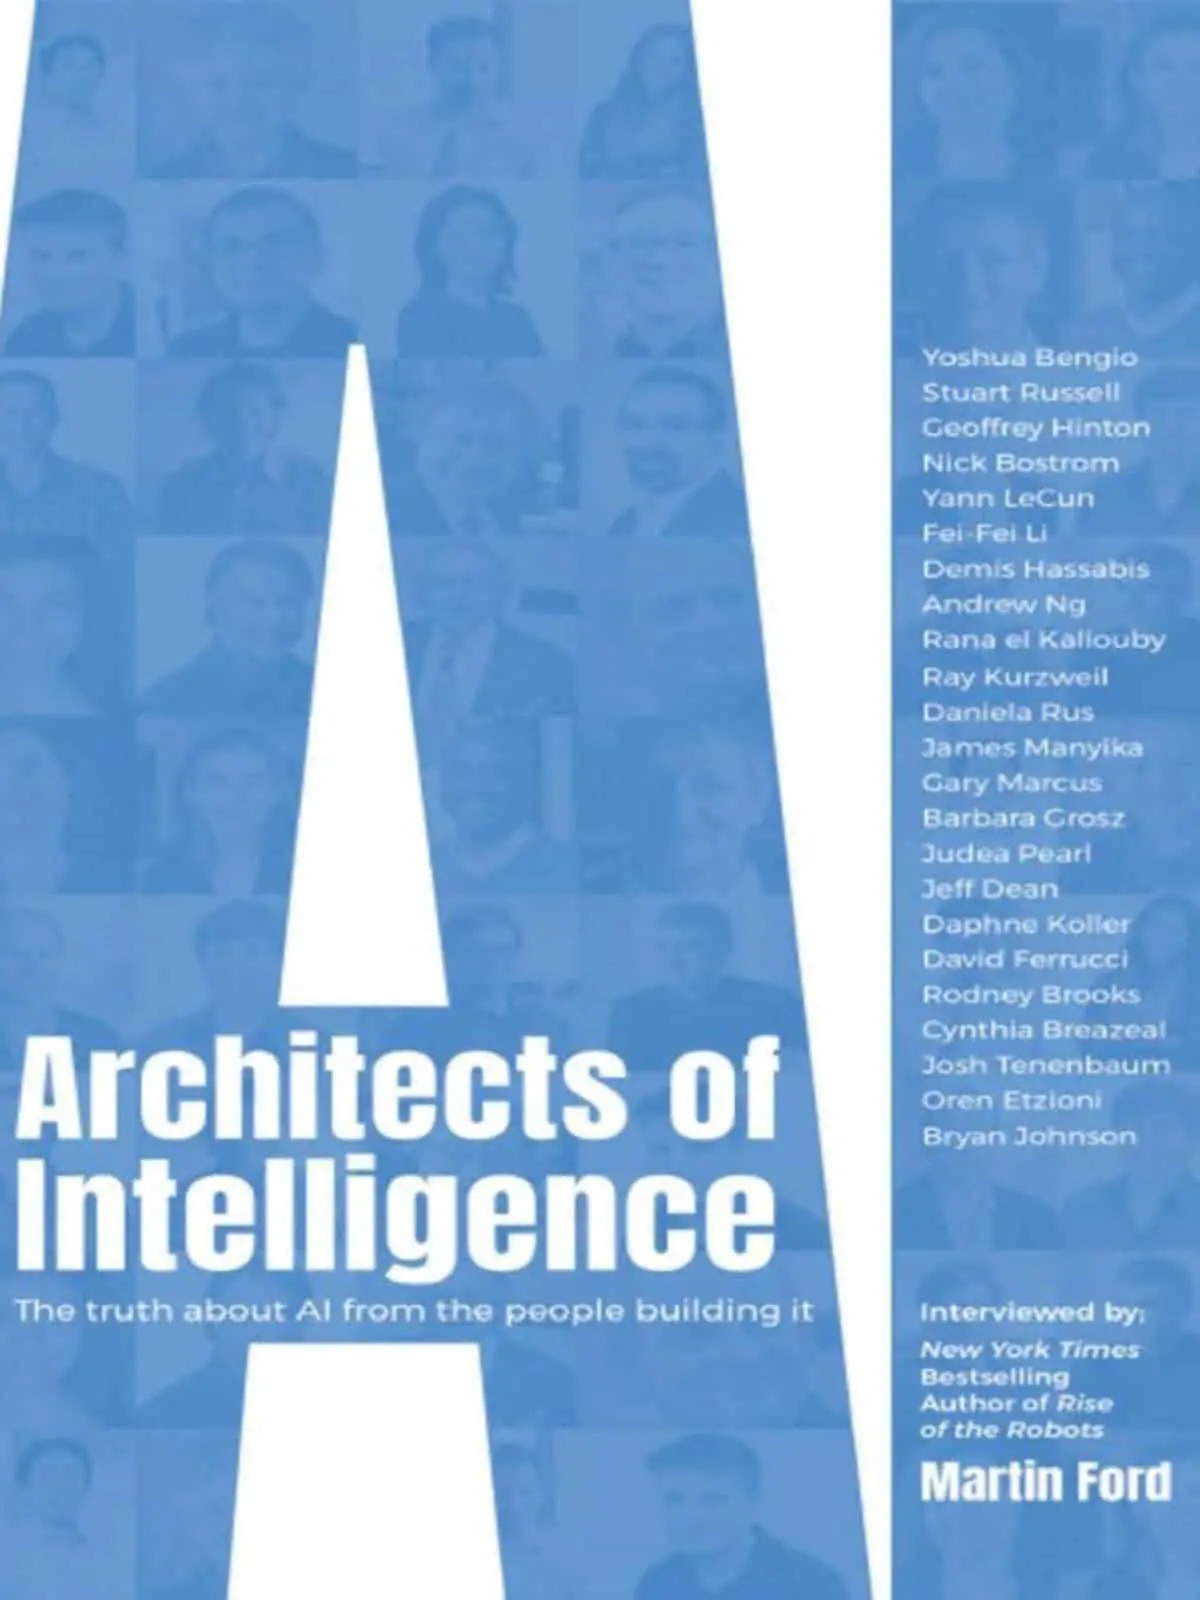 Architects of Intelligence: The Truth About AI From the People Building It by Martin Ford ($15.97) | Amazon's Best Selling Tech Kindle eBooks